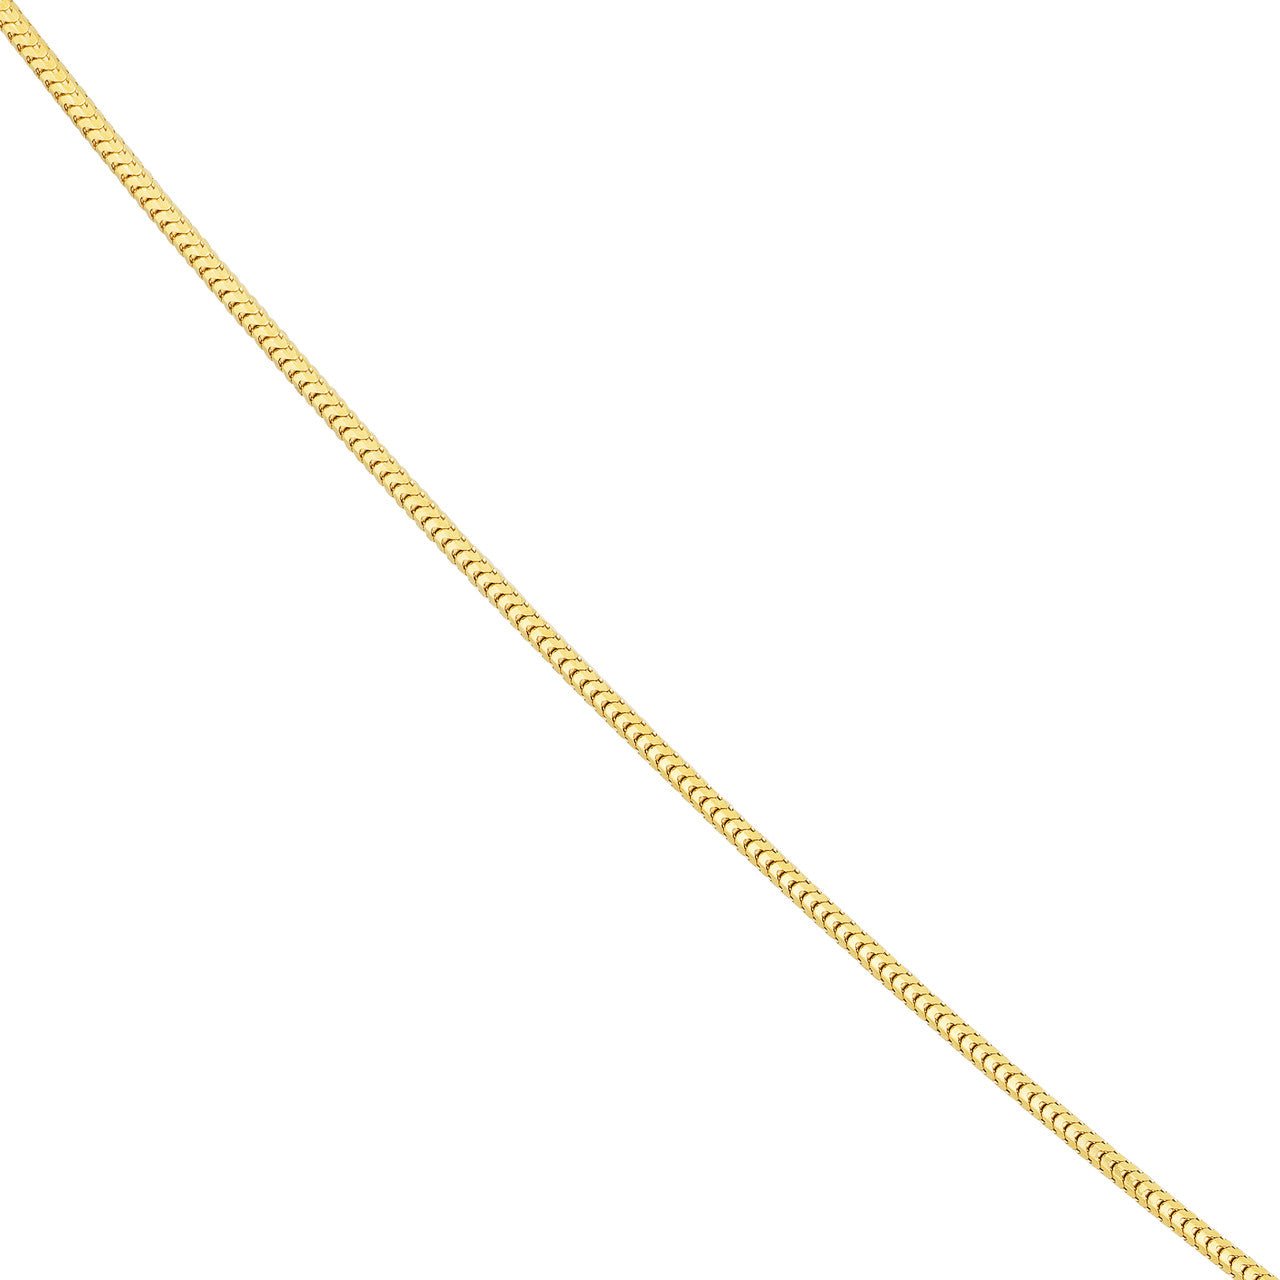 14KT YELLOW GOLD 4MM CONCAVE OPEN FIGARO CHAIN NECKLACE - 5 LENGTHS – GDS